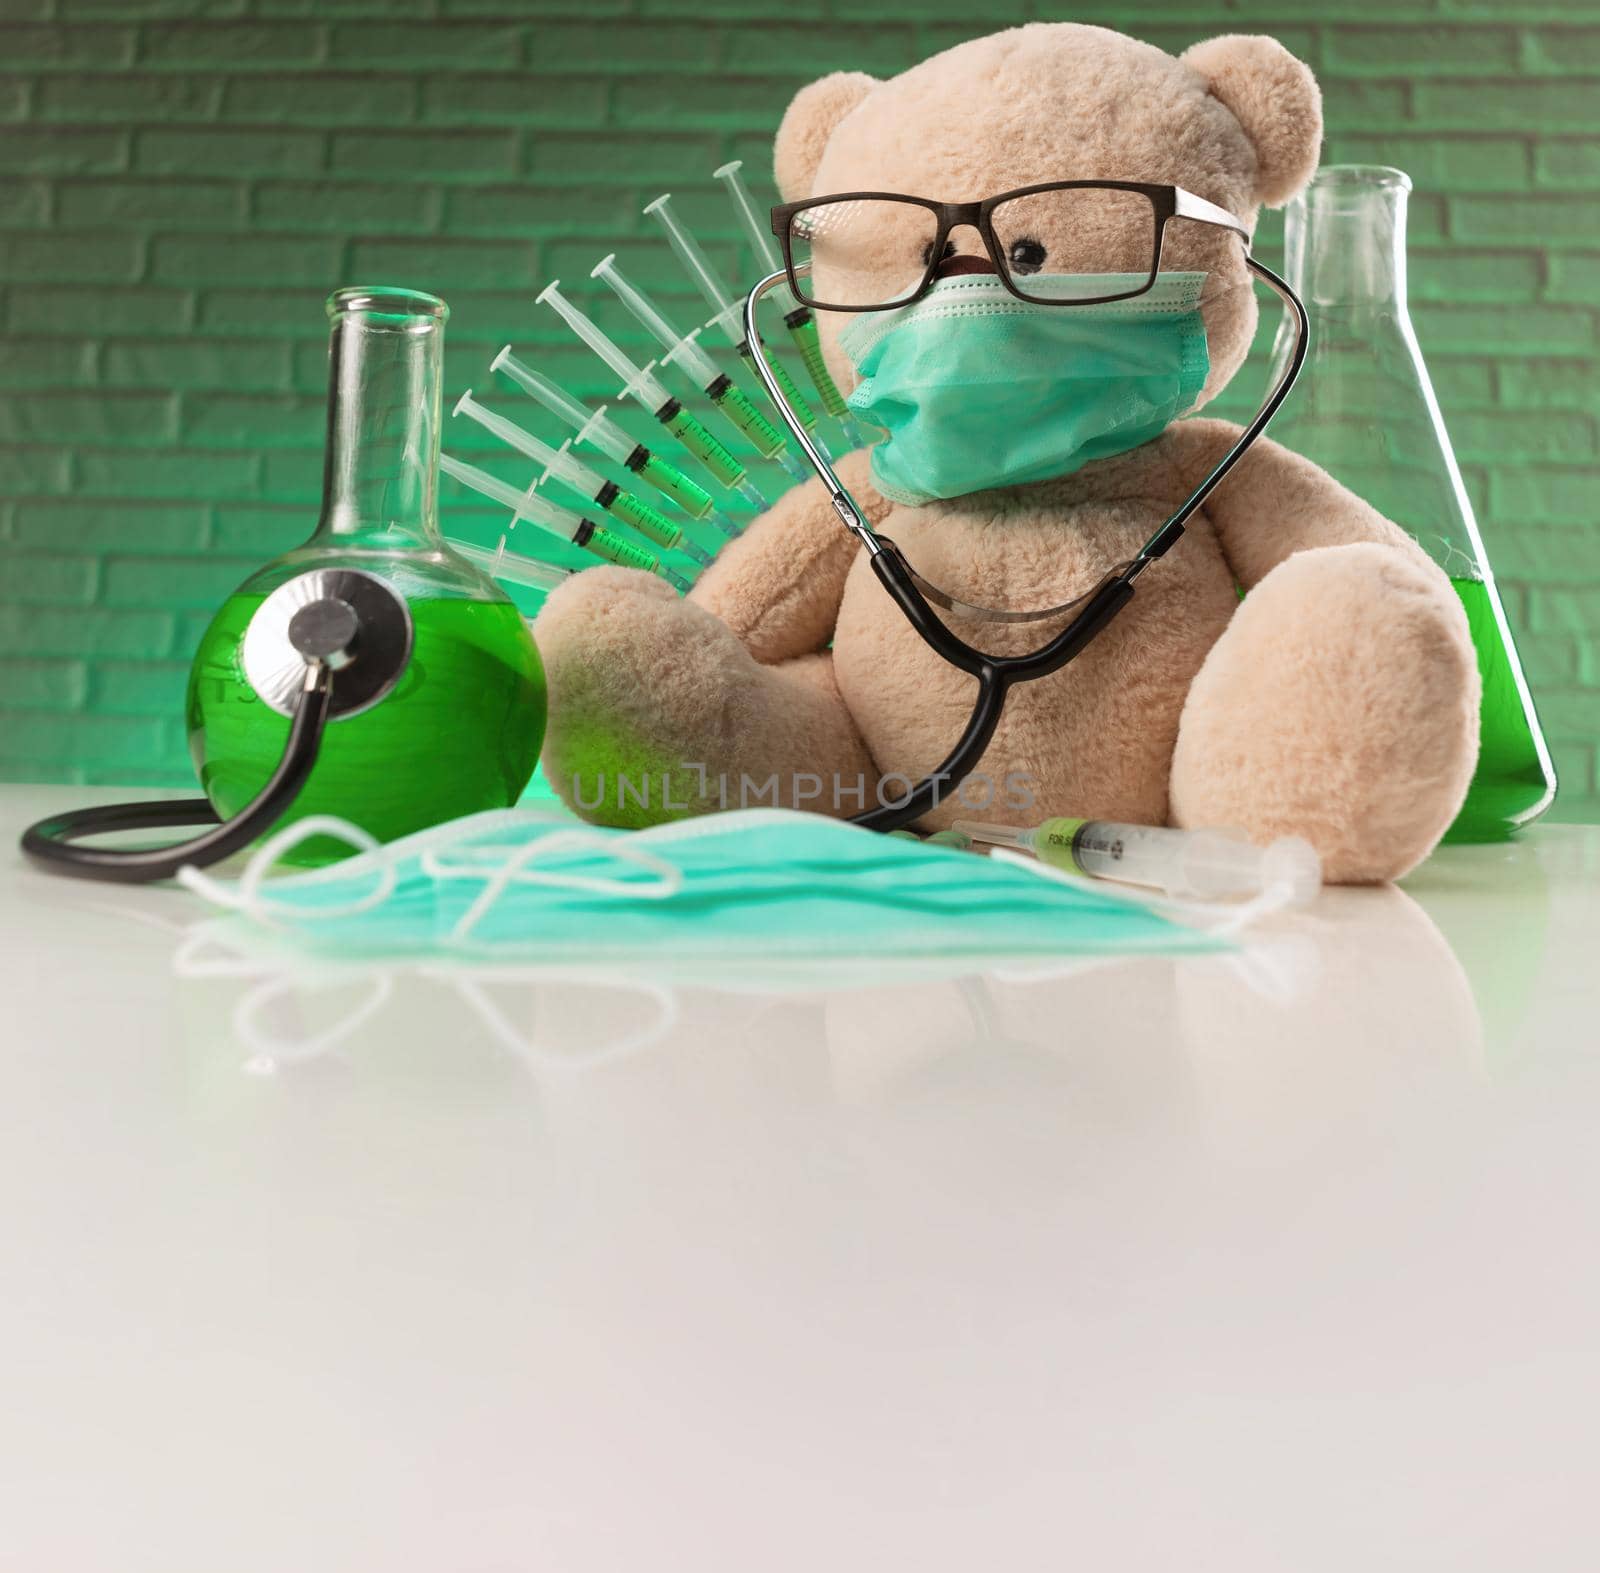 a teddy bear in a medical mask with syringes in his shoulder as a symbol of the research of vaccines and other drugs on animals or people